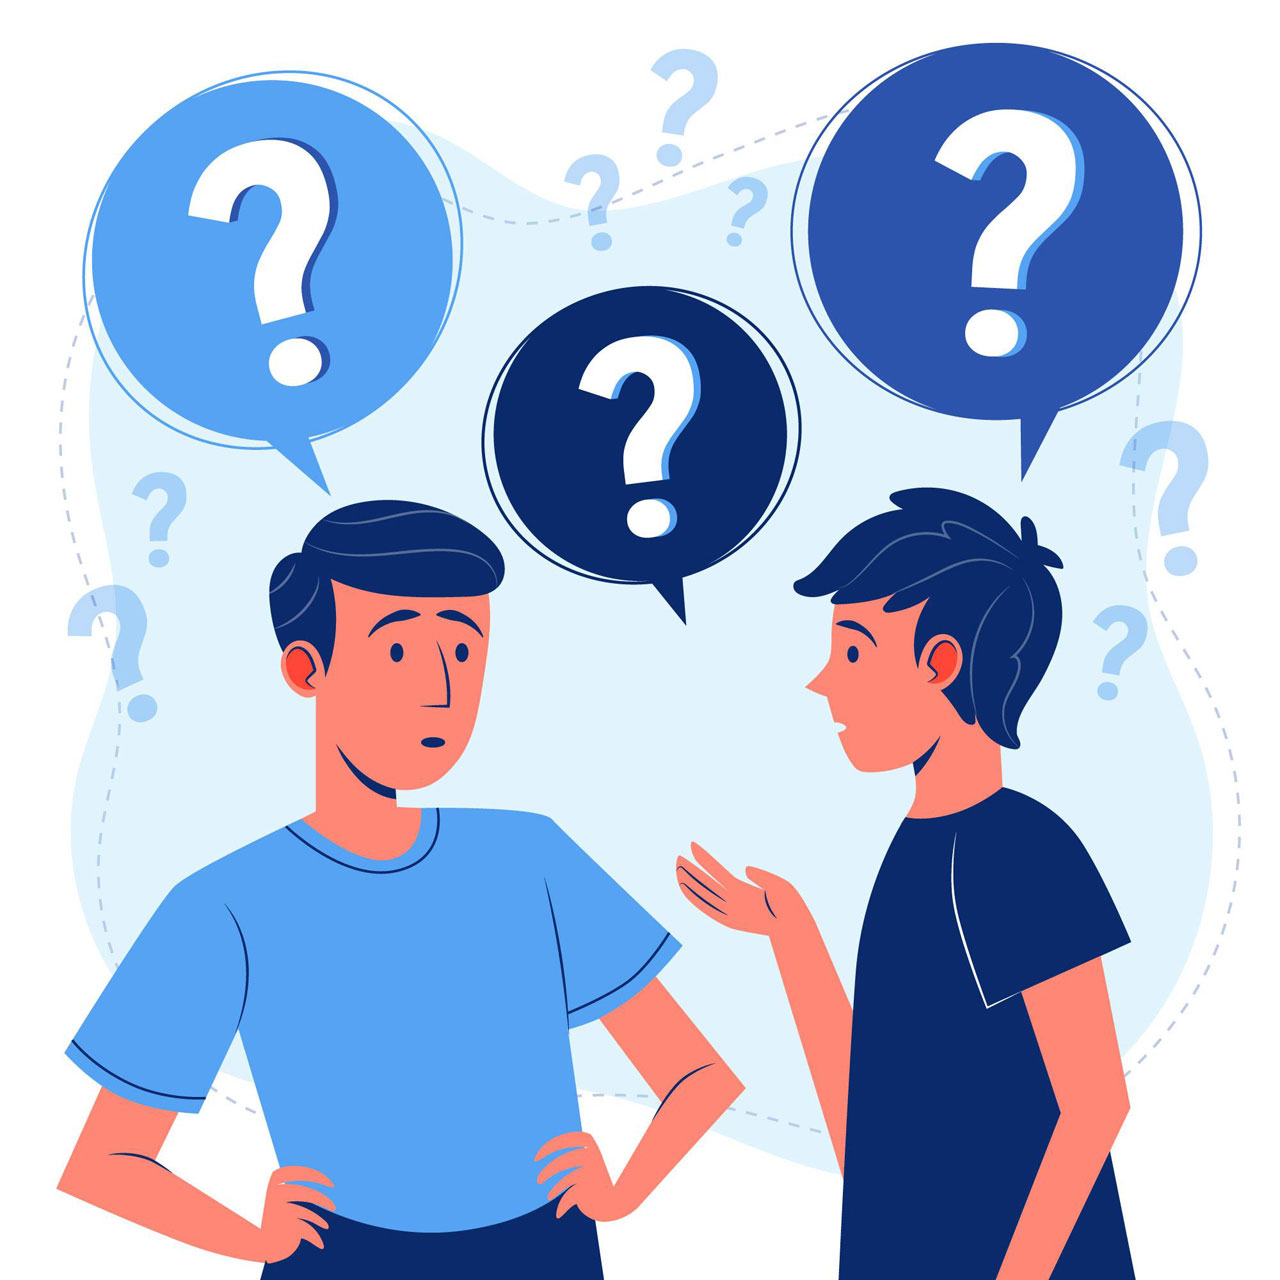 Organic people asking questions cartoon image